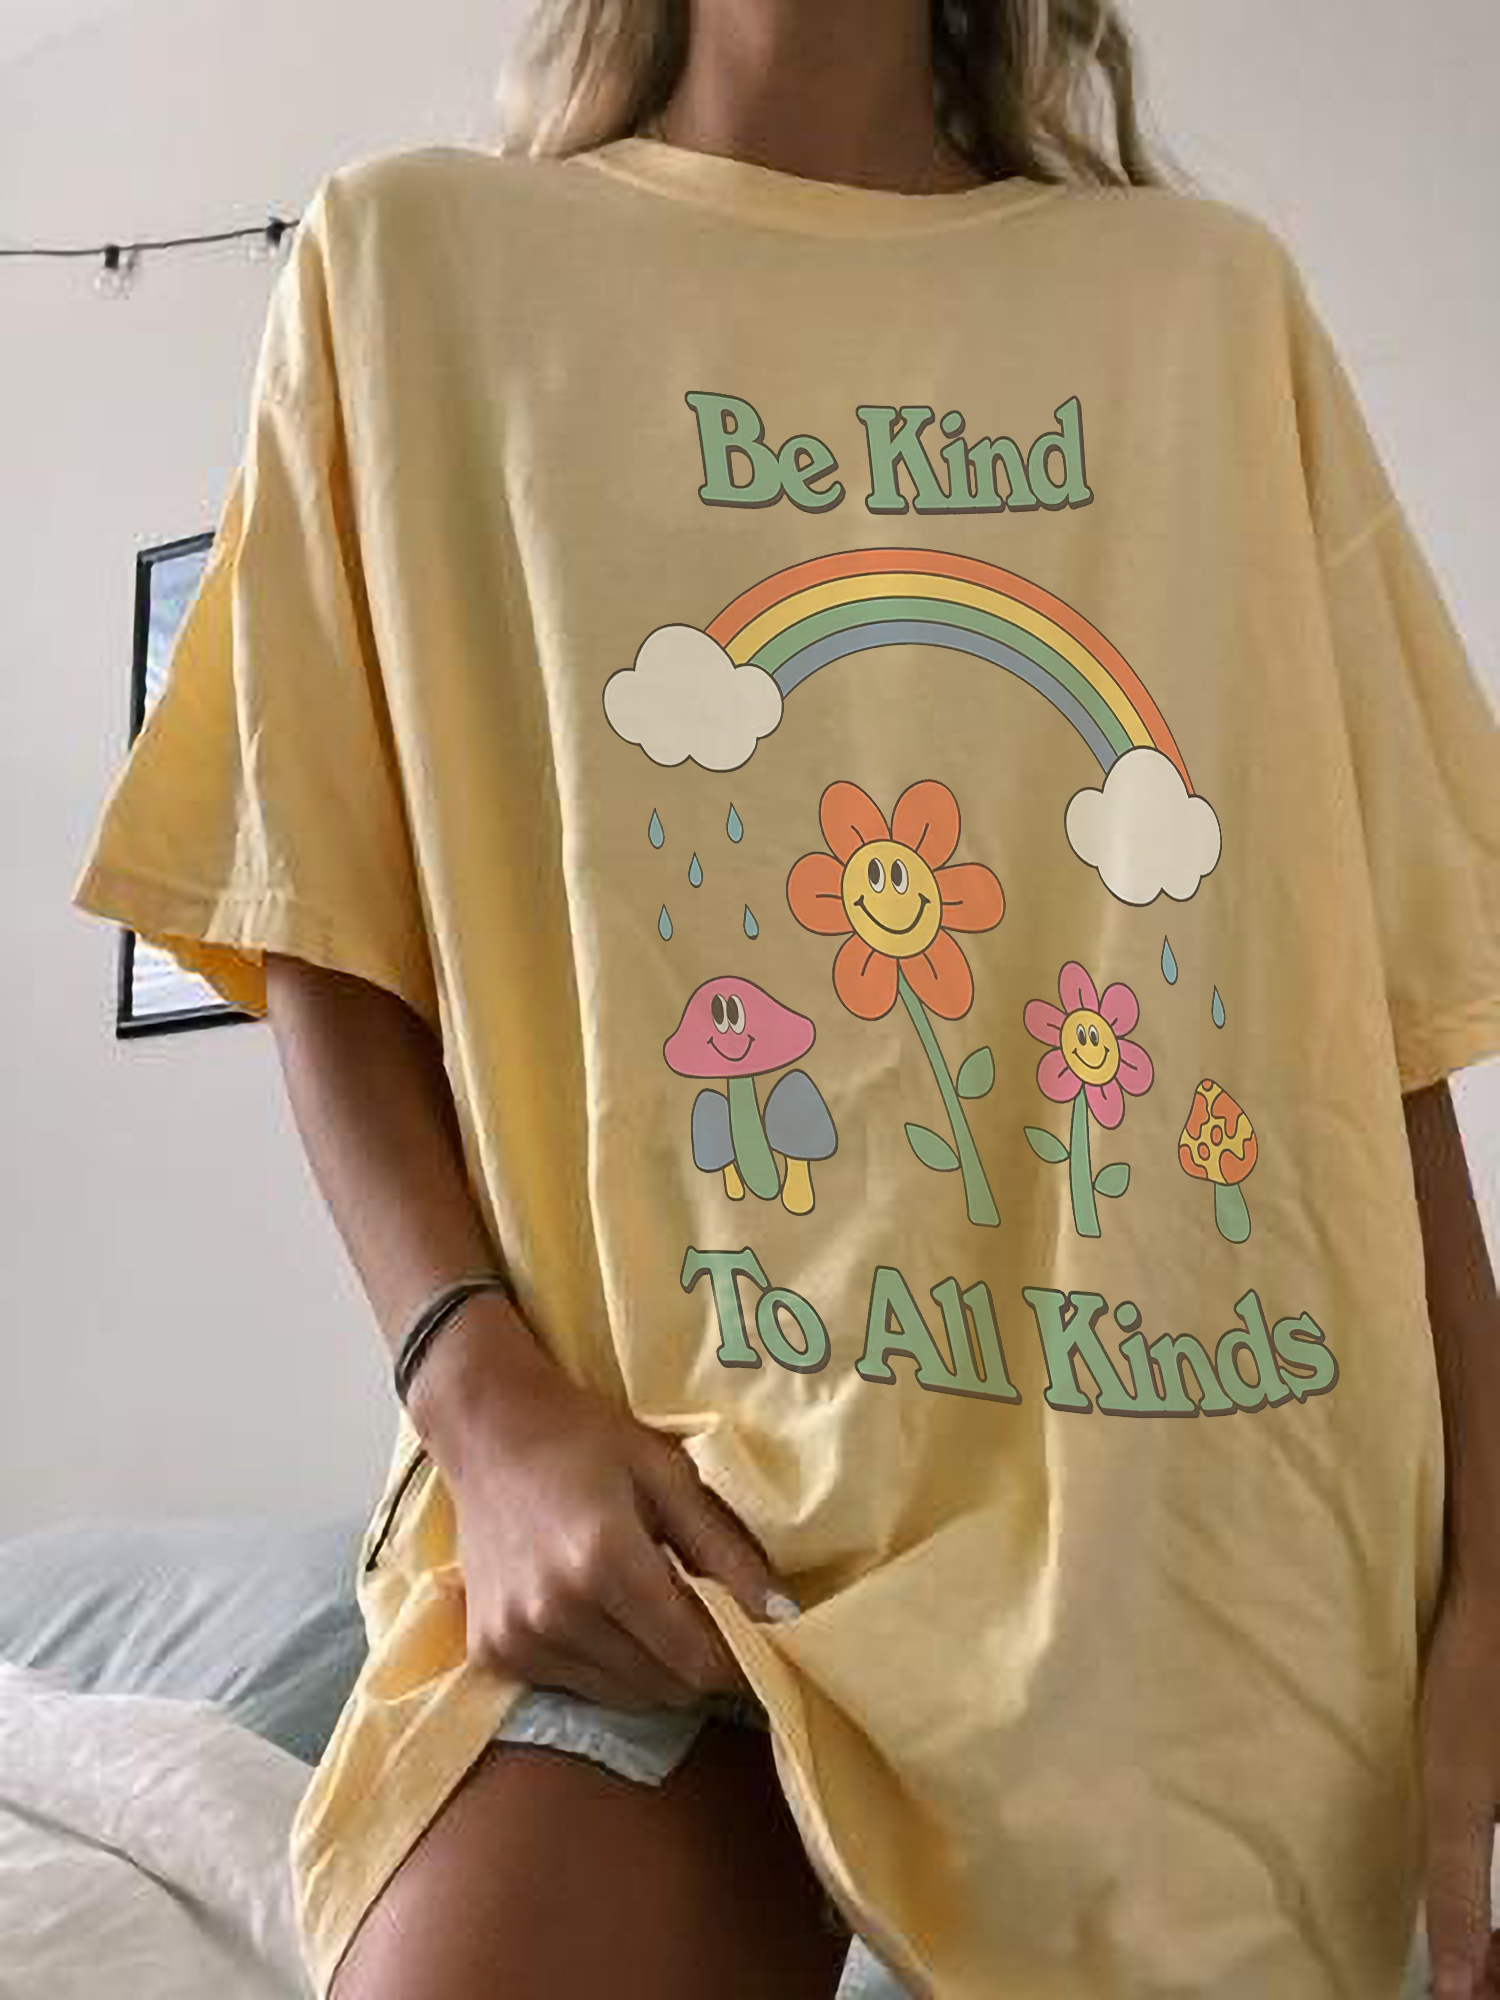 Be kind to all kinds Printed Oversized Unisex T-shirt